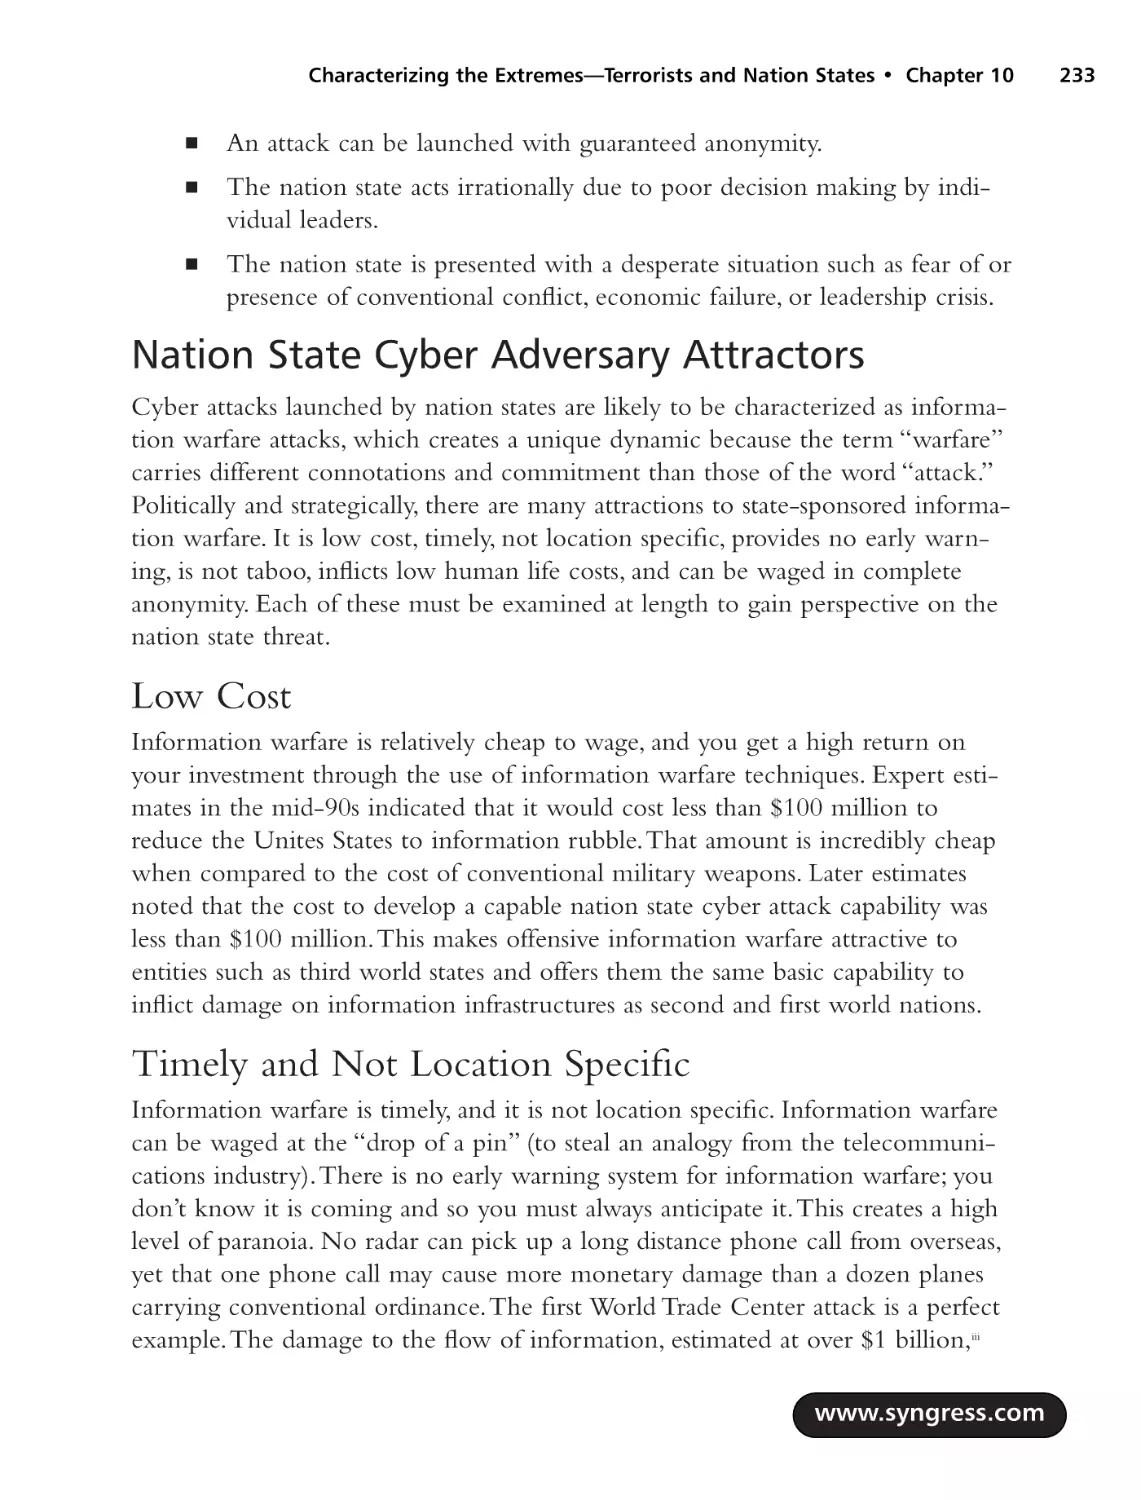 Nation State Cyber Adversary Attractors
Low Cost
Timely and Not Location Specific